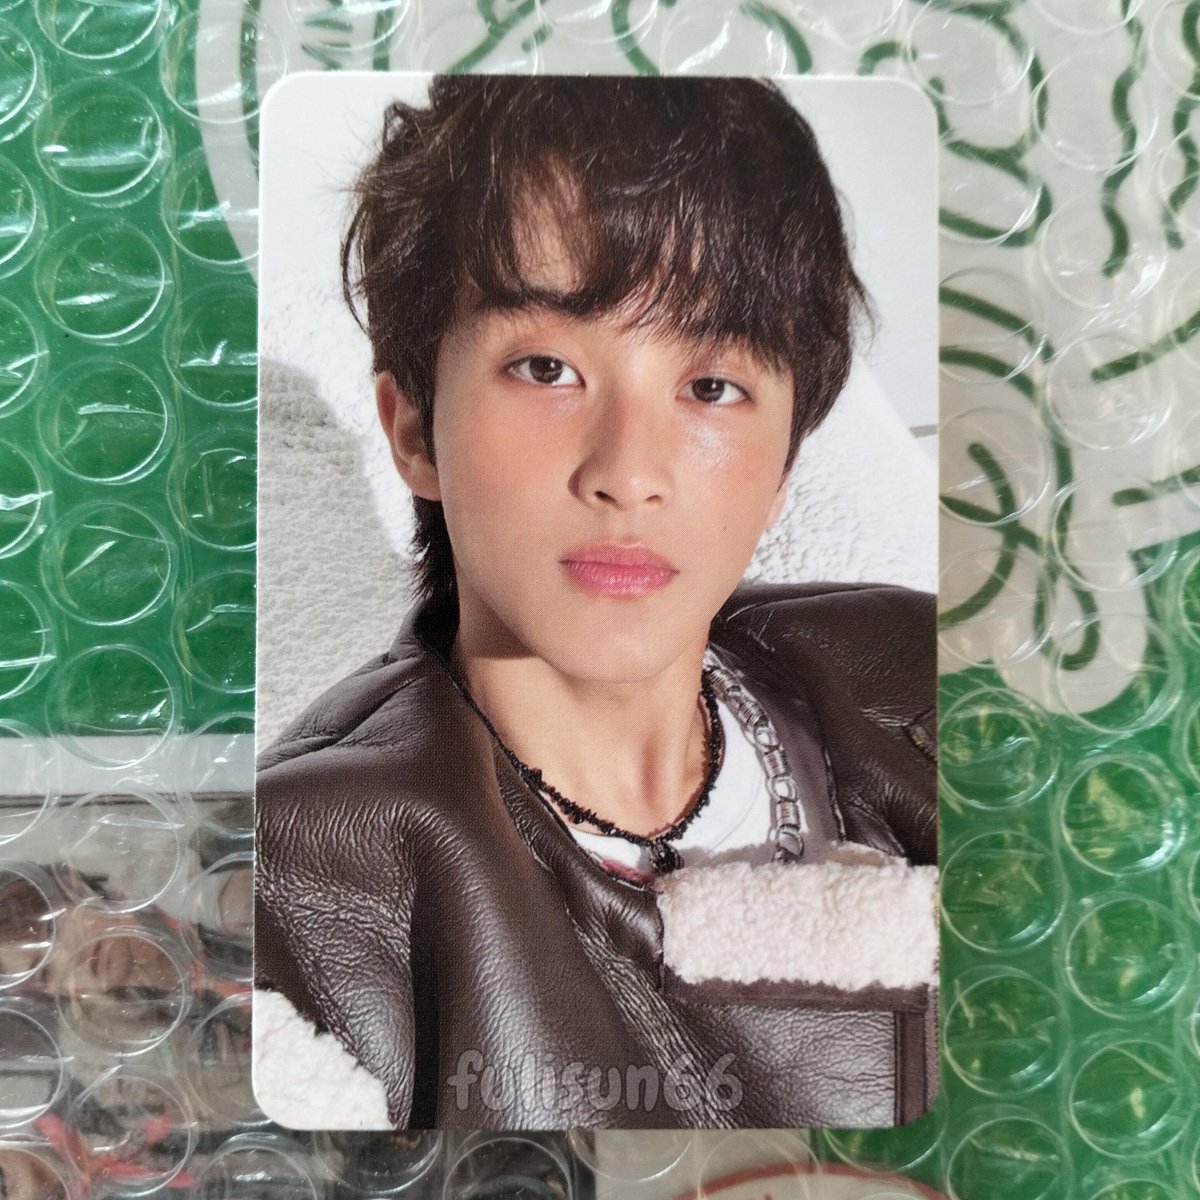 wts // want to sell

✨ pc mark smcu palace guest ver [ nct dream ]

💰 125k

❌ exc packing 3k & admin shopee
✅ full shopee
📍 jateng

t. 2022 winter smtown album tipsy photocard lfb ina